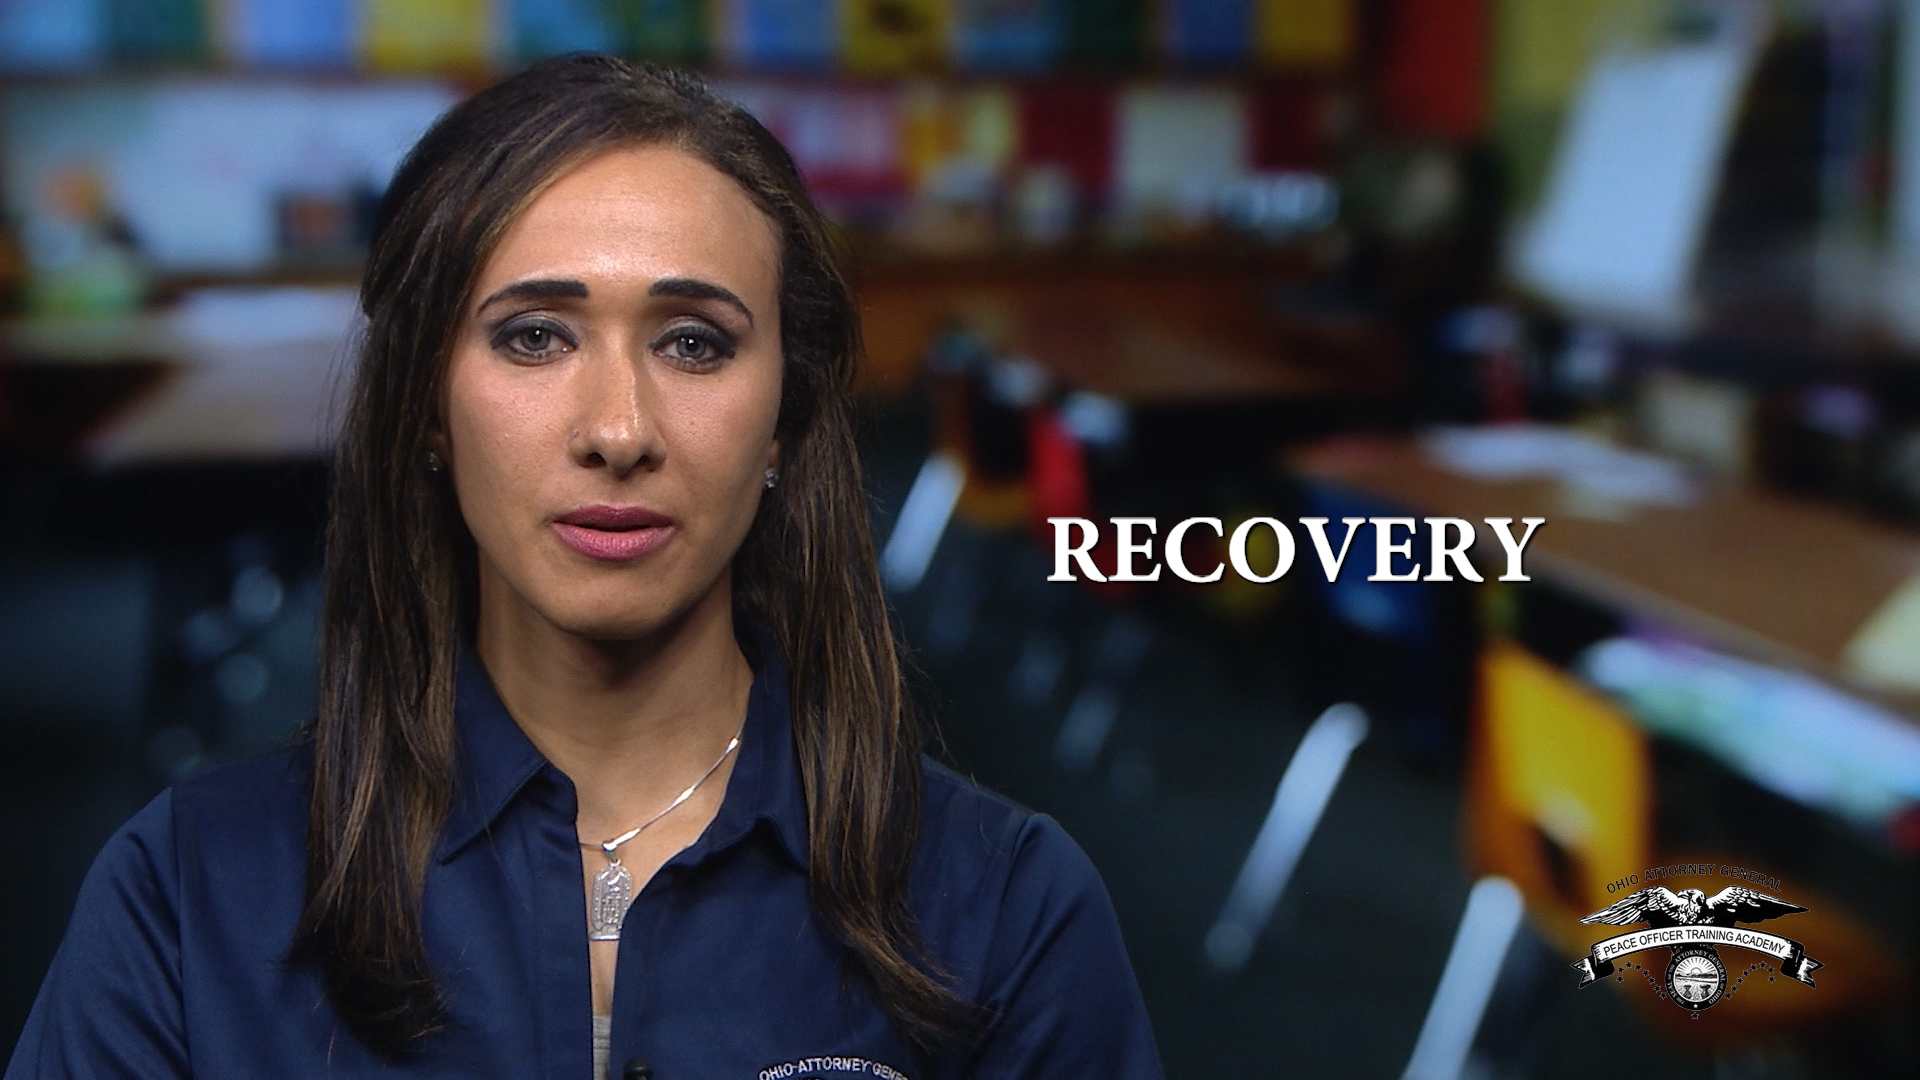 Video 10: Recovery